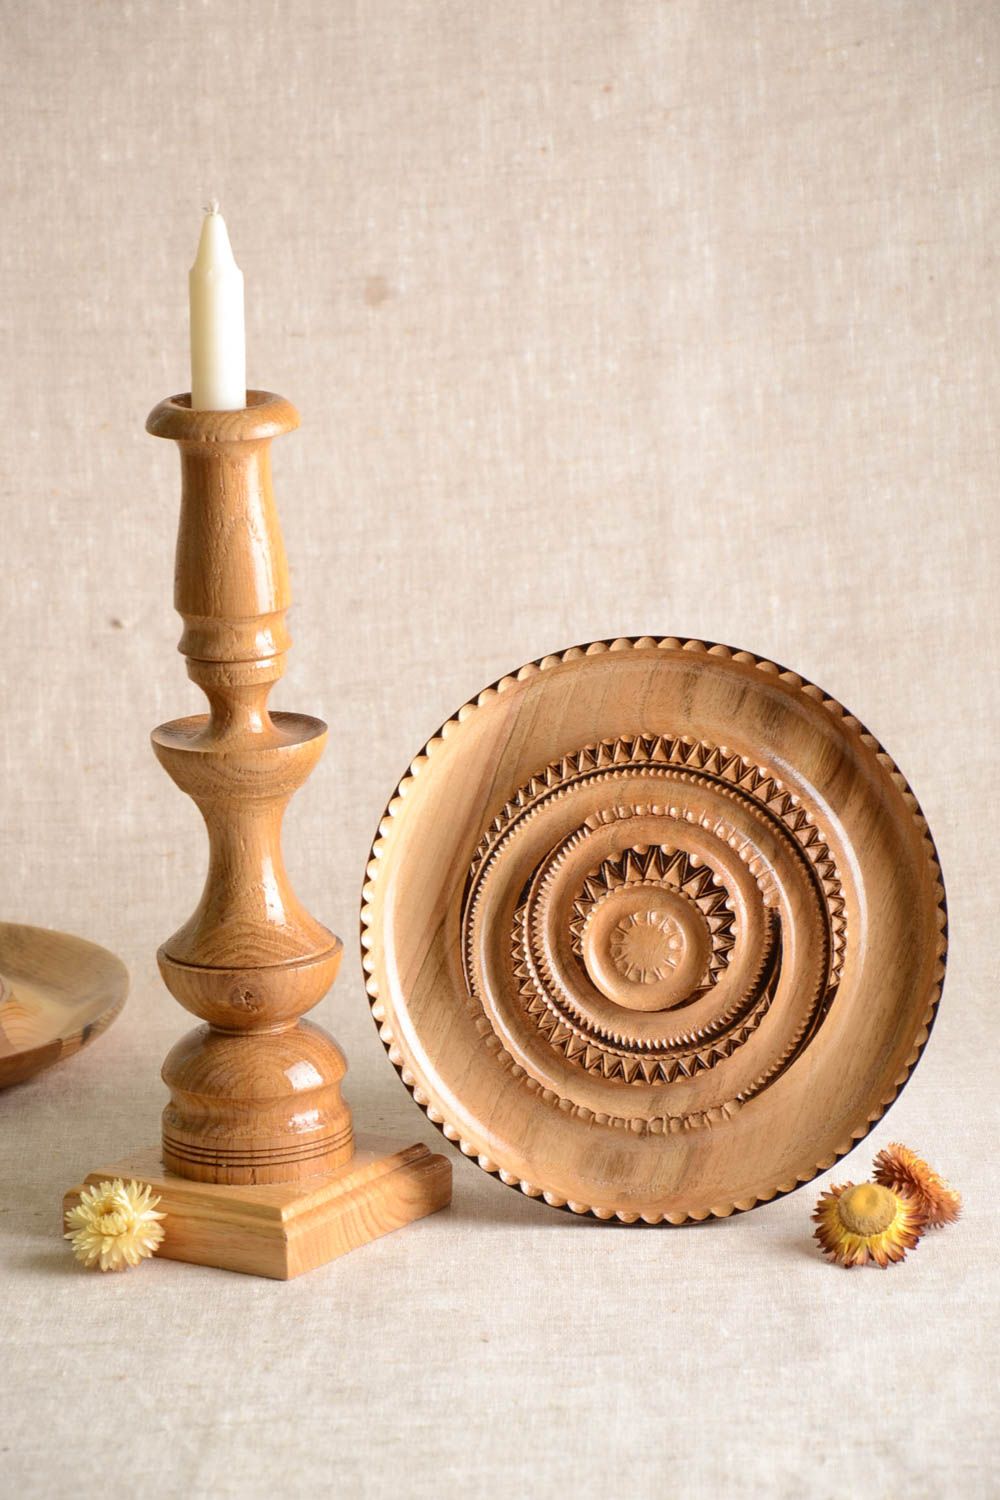 Home decoration 2 pieces handmade wooden candlestick wall plate design gift idea photo 1